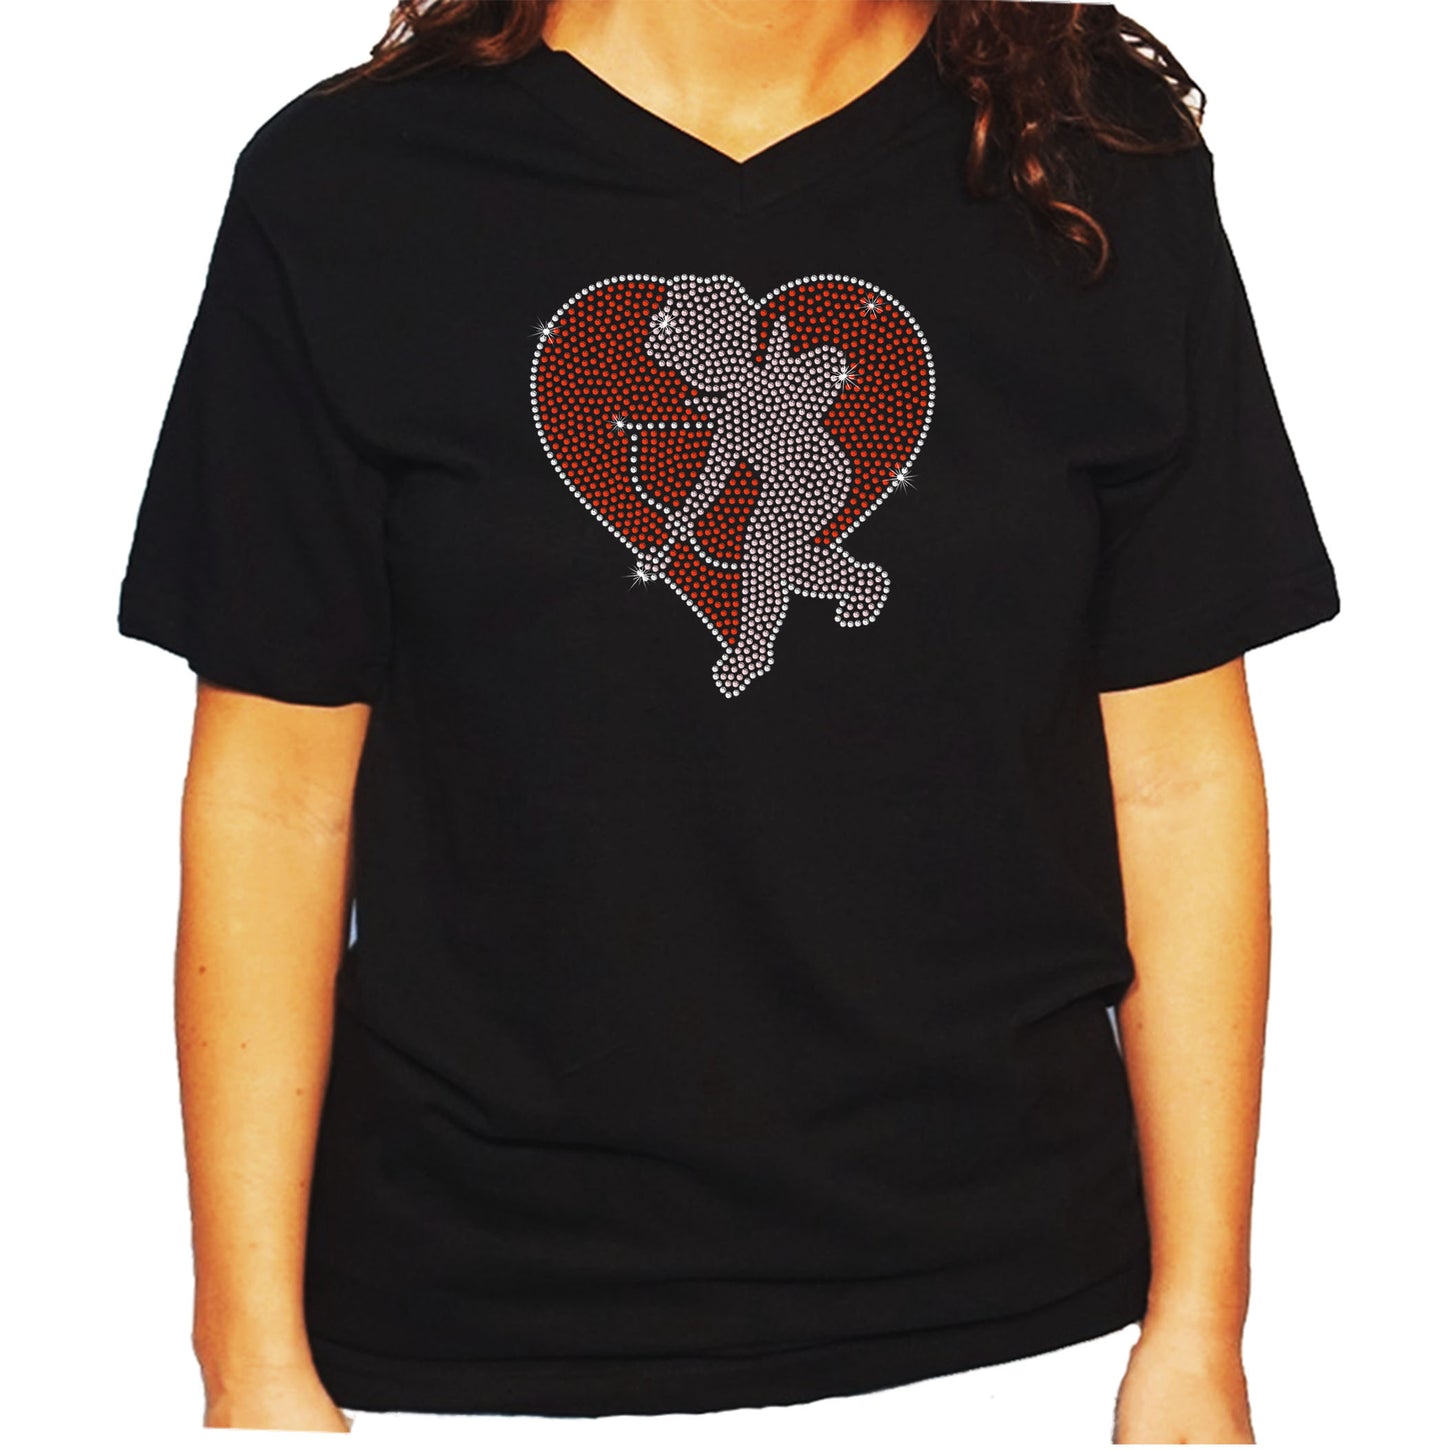 Women's/Unisex Rhinestone T-Shirt with Red Heart with Cupid and His Bow and Arrow - Valentines Shirt